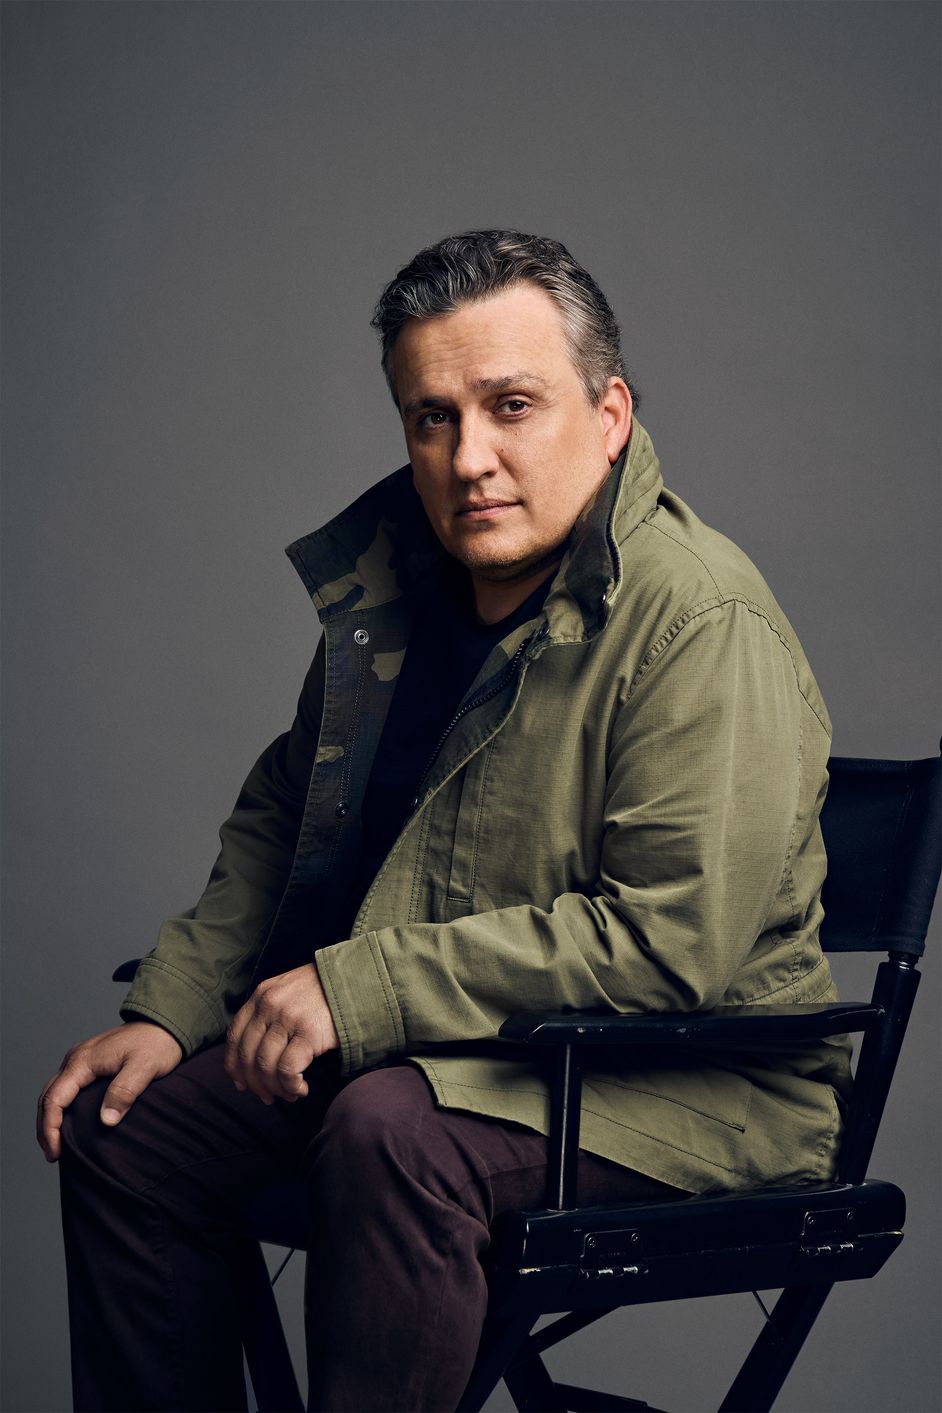 A portrait of Joe Russo sitting in his director’s chair.